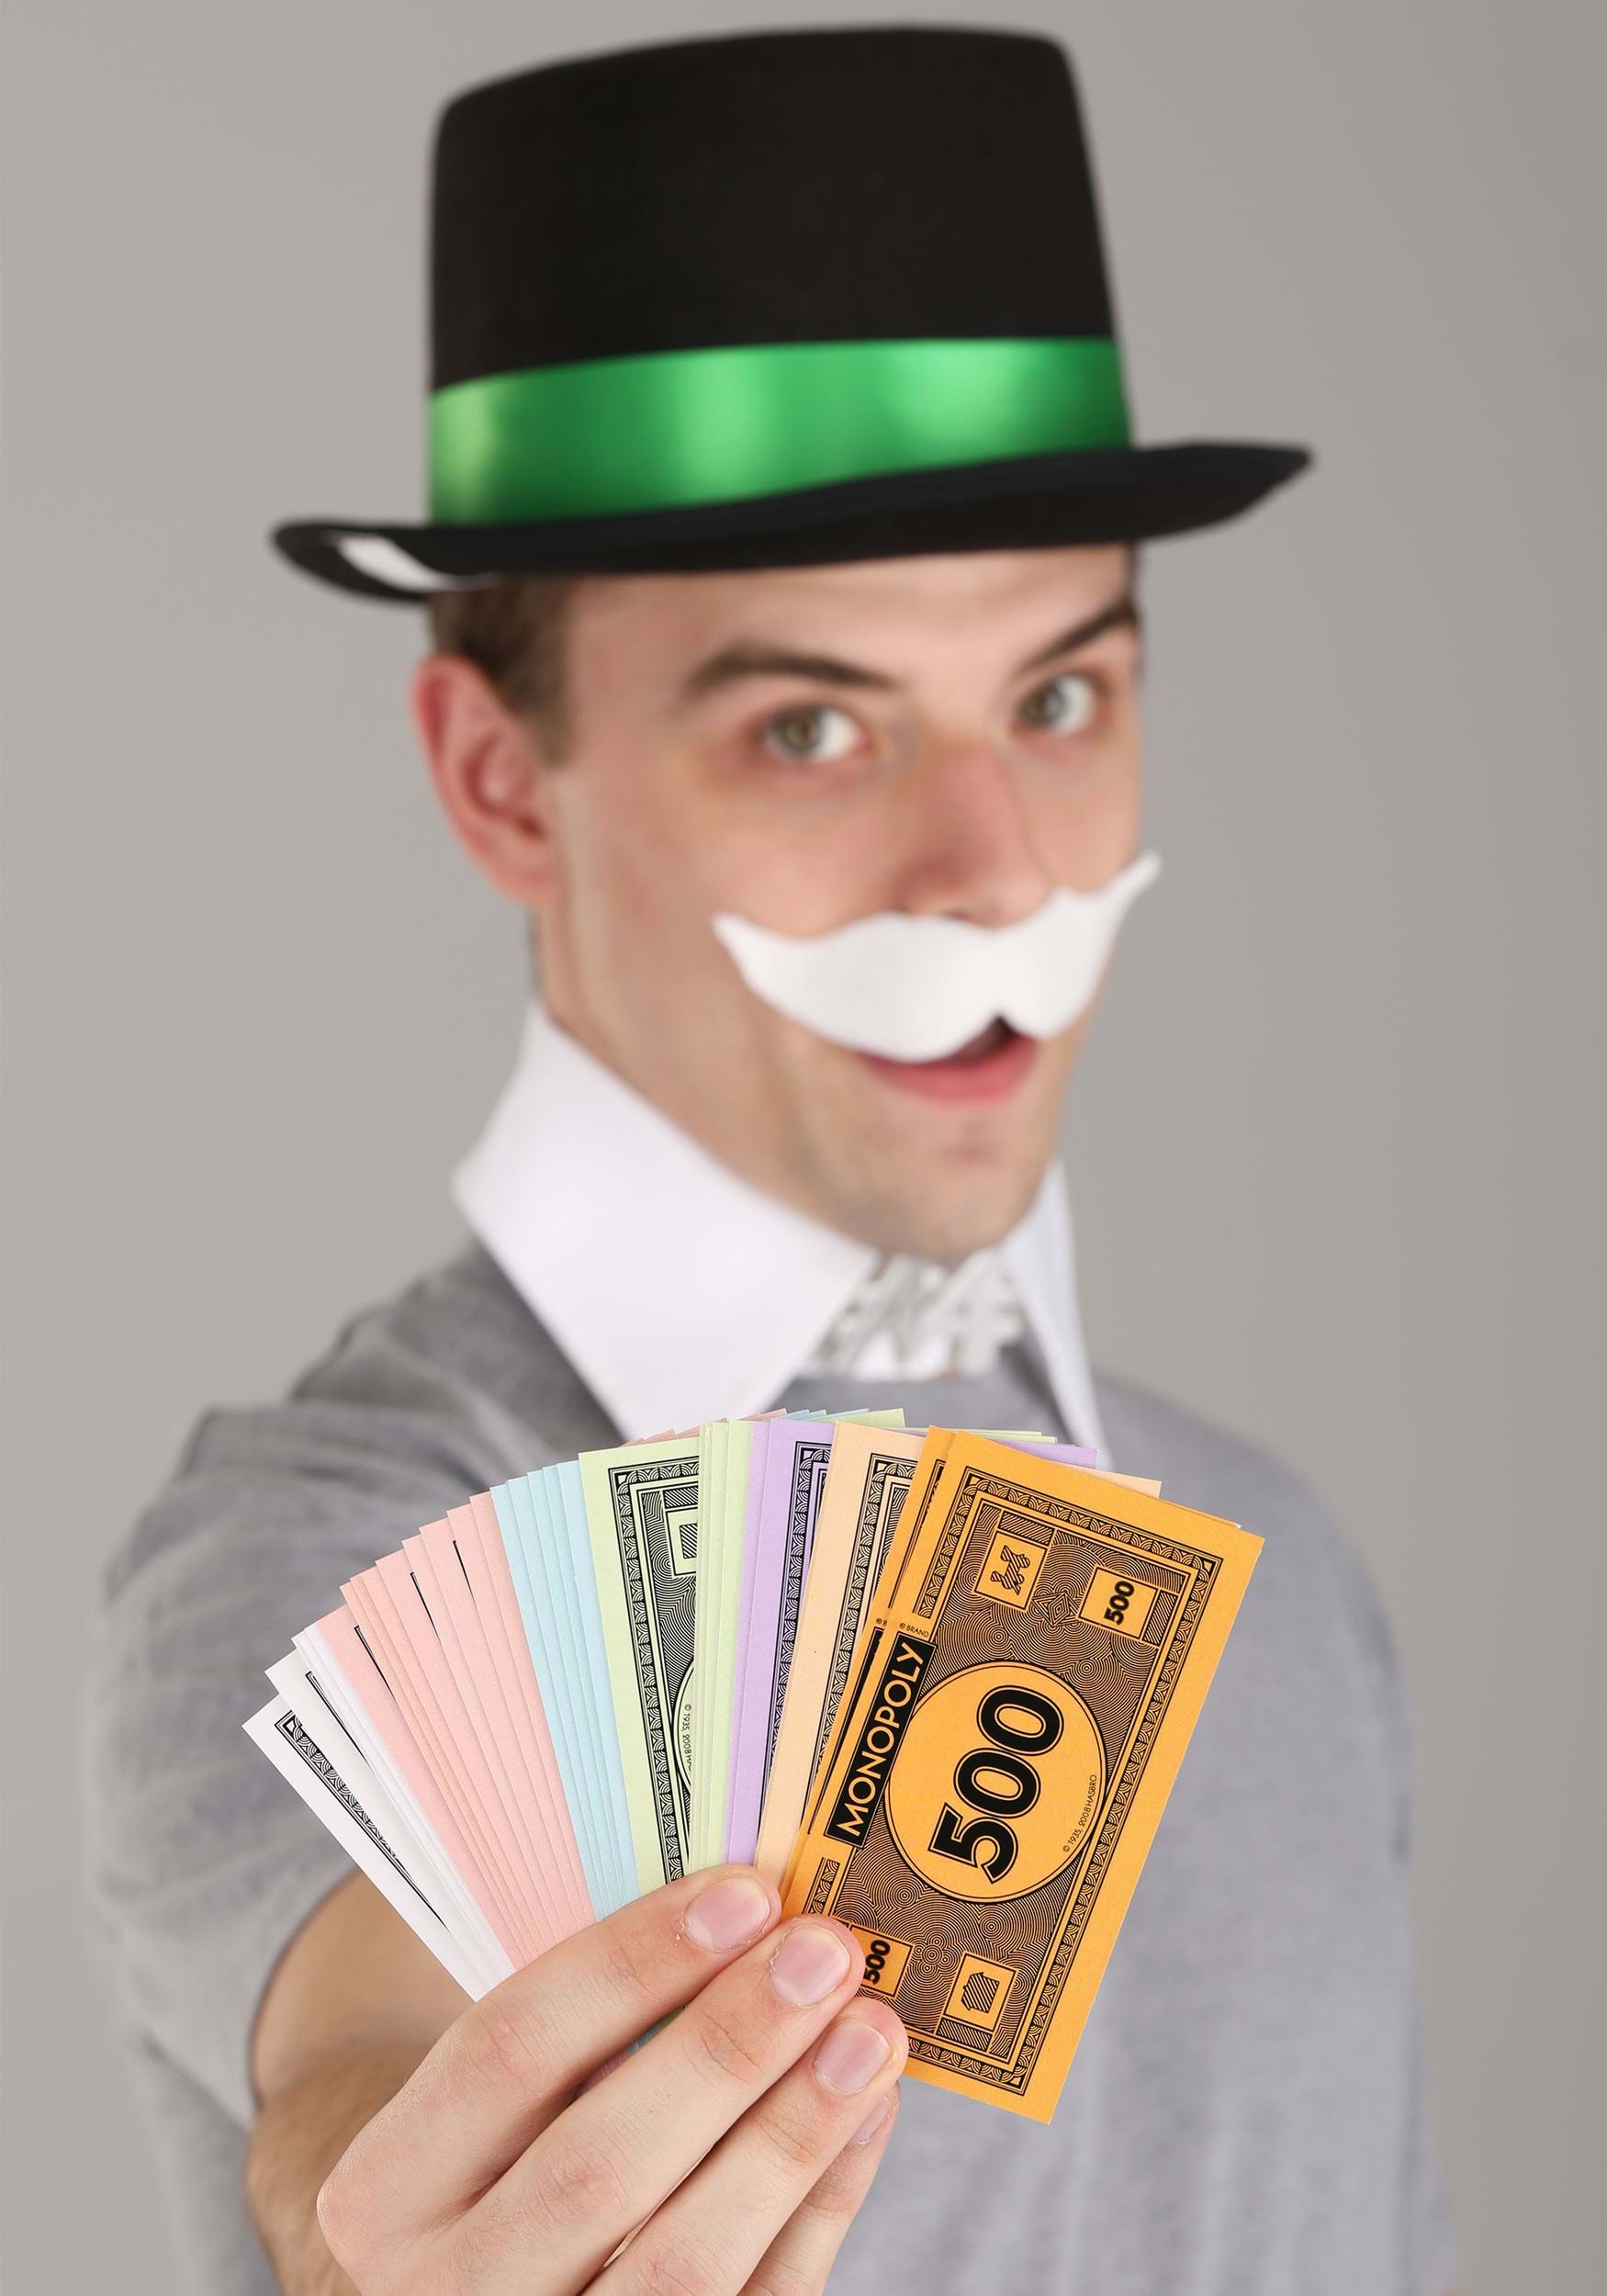 Monopoly Man Costume Kit For Adults